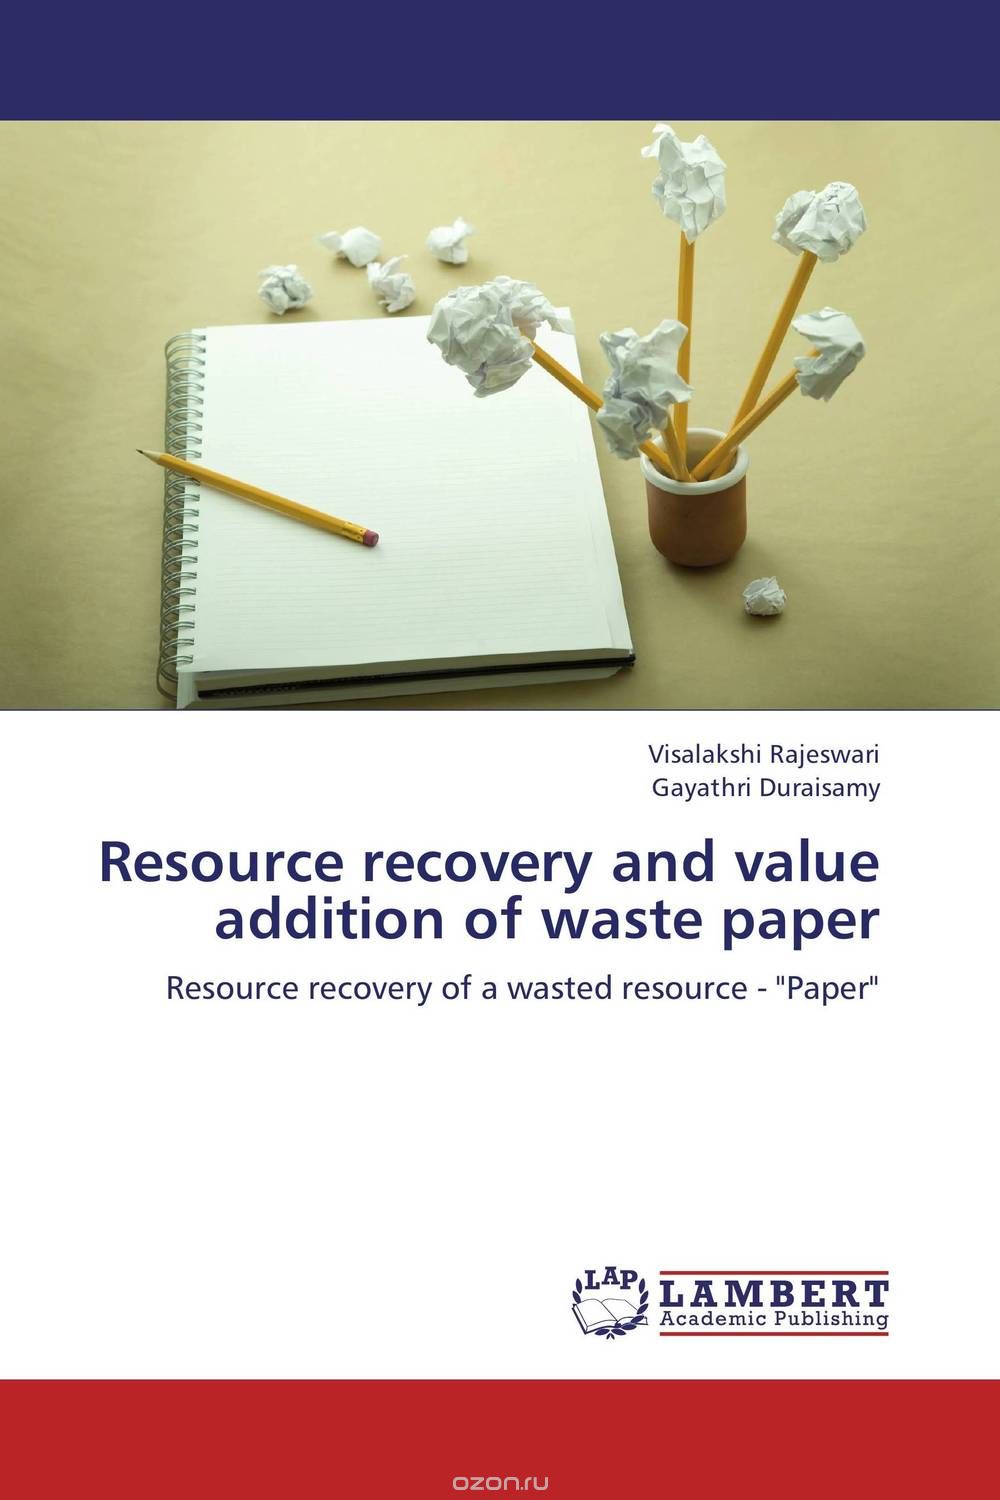 Resource recovery and value addition of waste paper